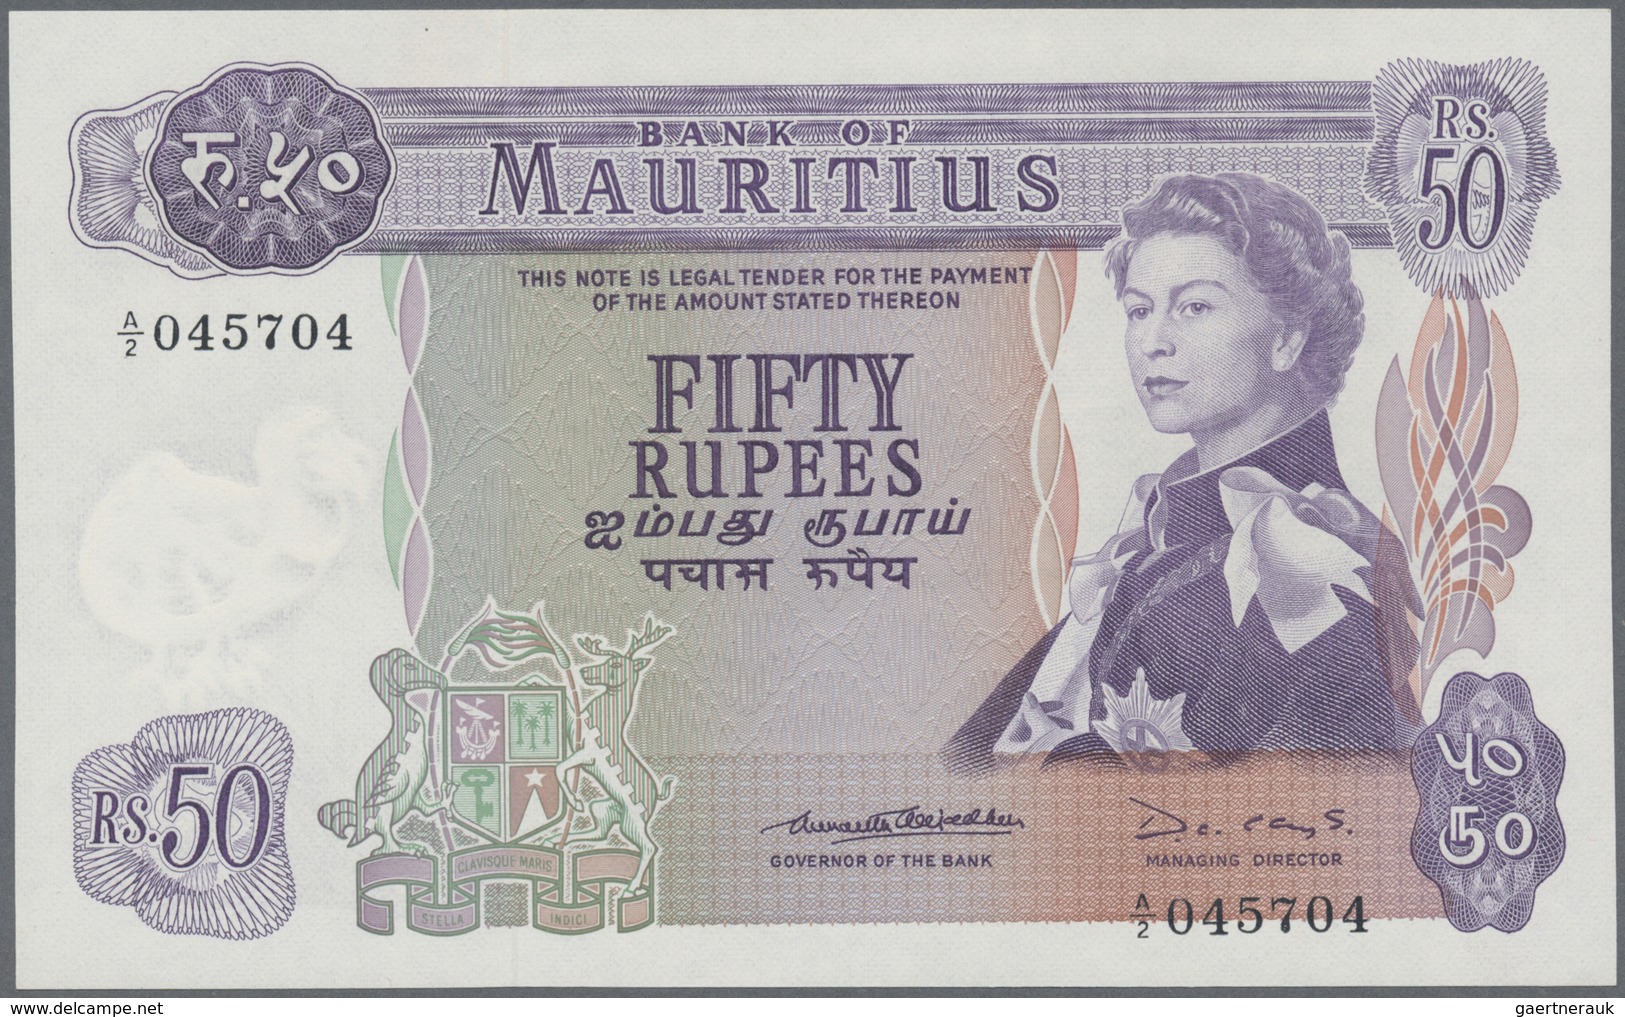 Mauritius: Set with 8 Banknotes 1967 5 Rupees A/46 581027, 25 Rupees A/11 116320. 50 Rupees 6x A/12